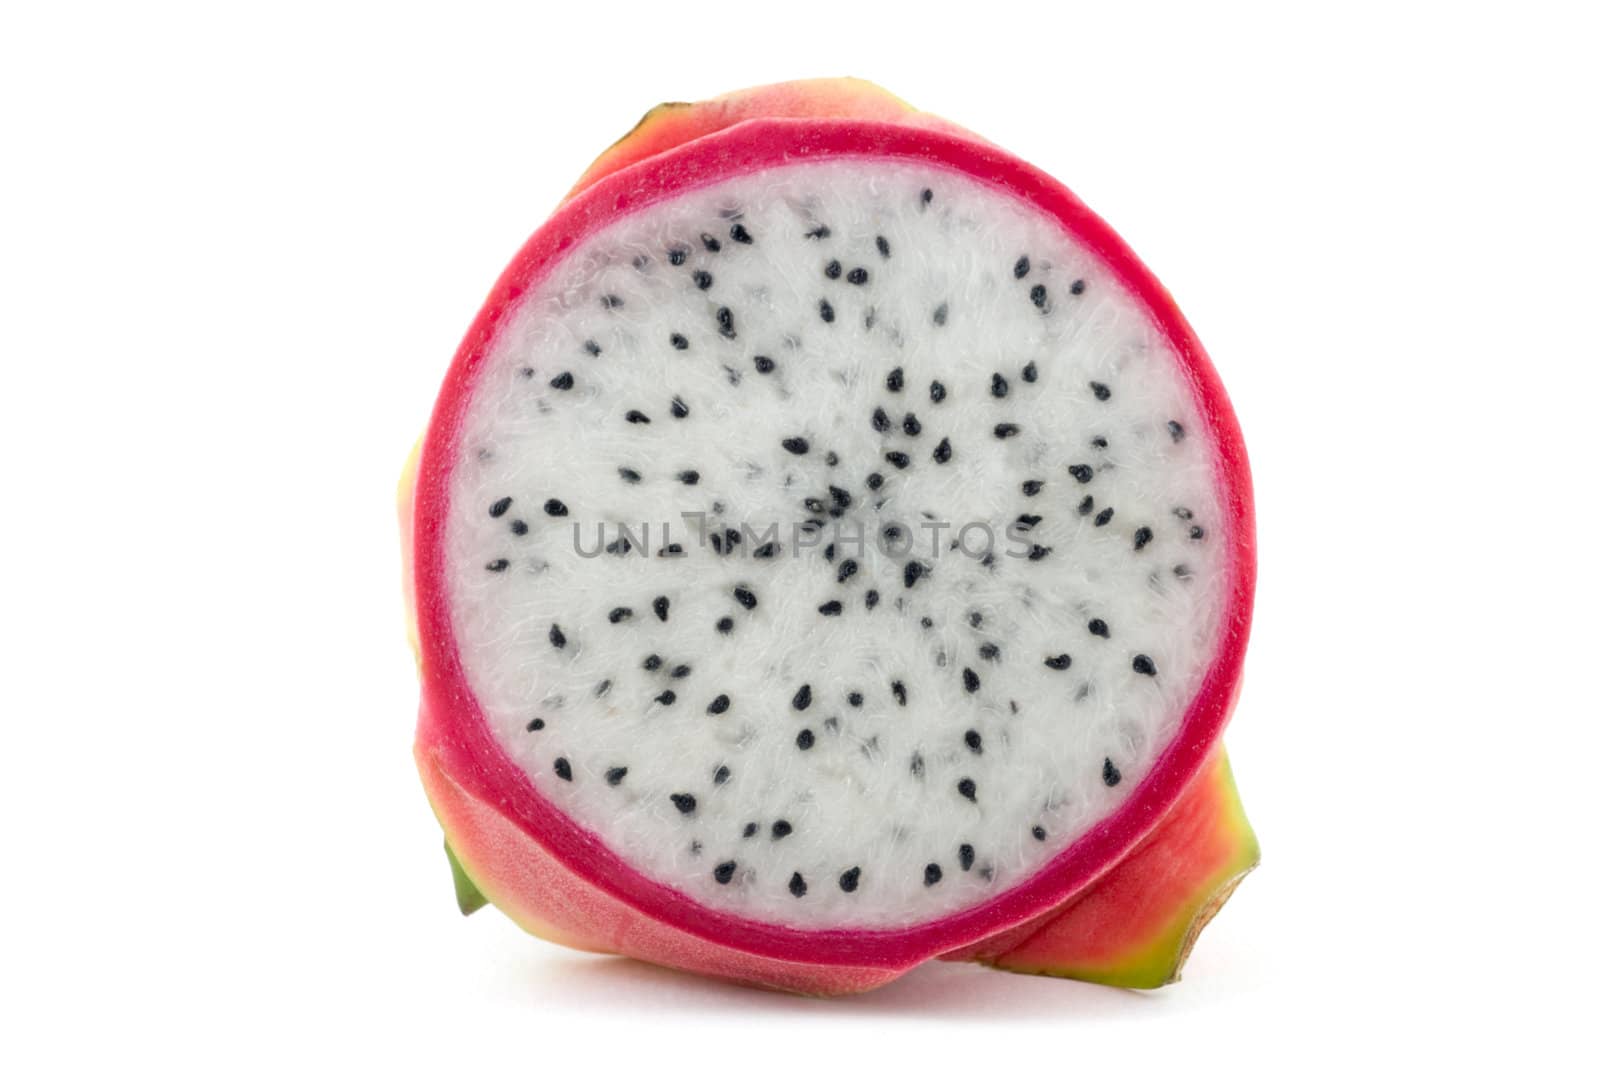 A sliced dragon fruit (Hylocereus undatus pitayas) isolated on a white background. Clipping path included. Adobe RGB color profile.